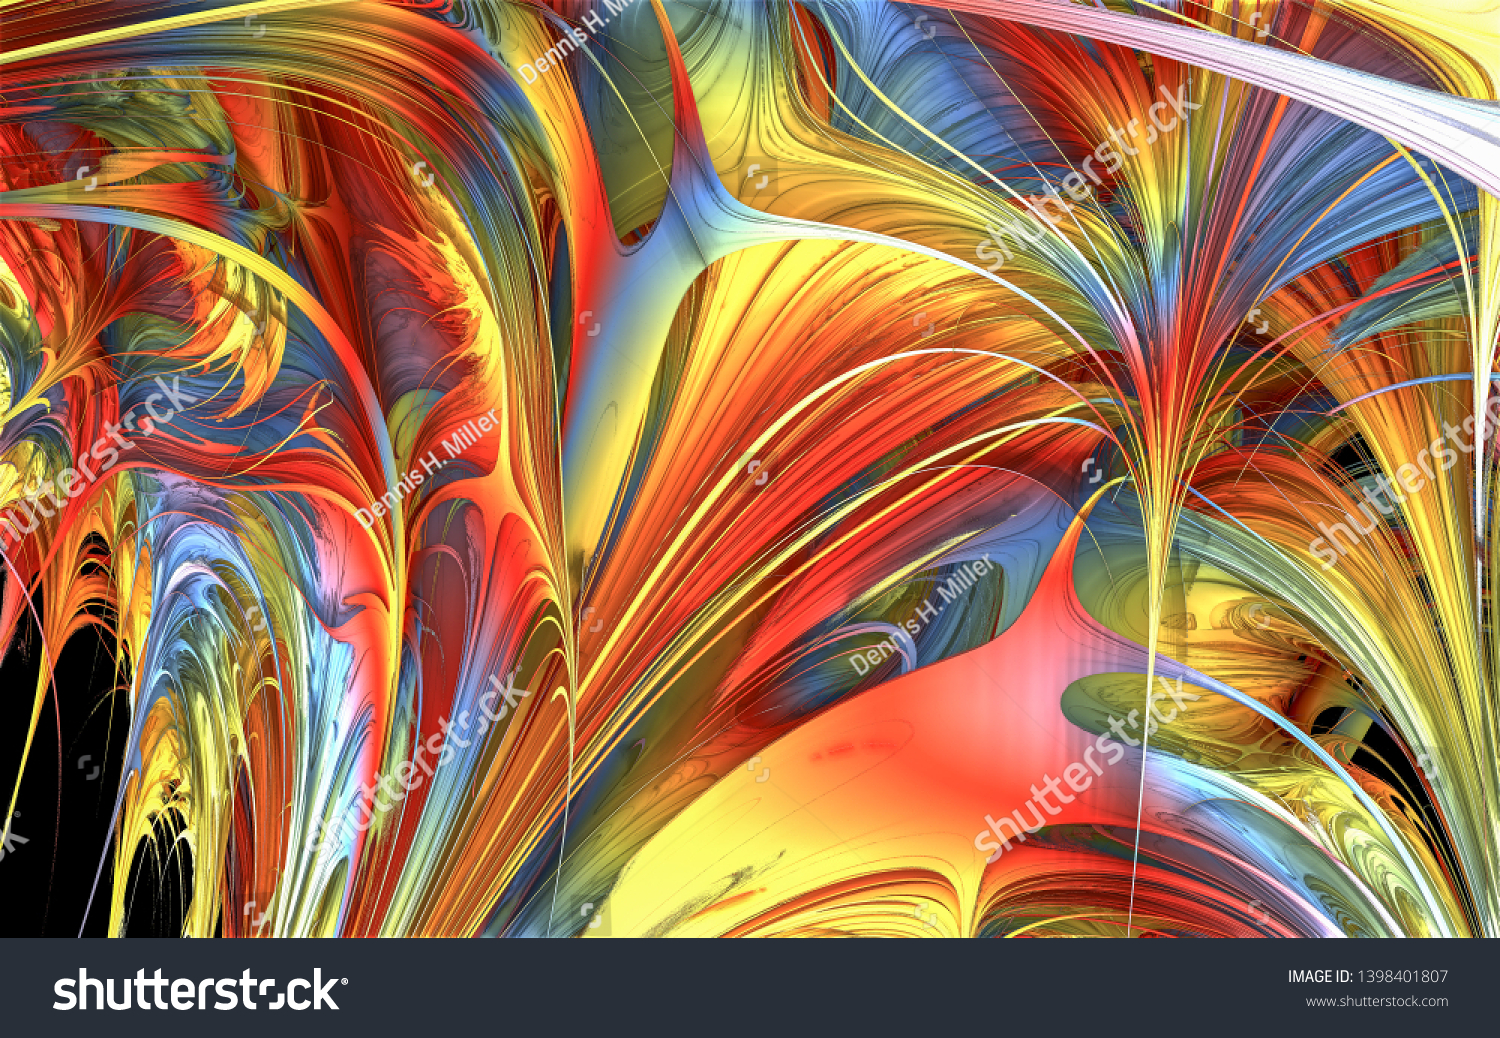 Fineart Computergenerated 3d Rendered Abstract Imagery Stock Illustration 1398401807